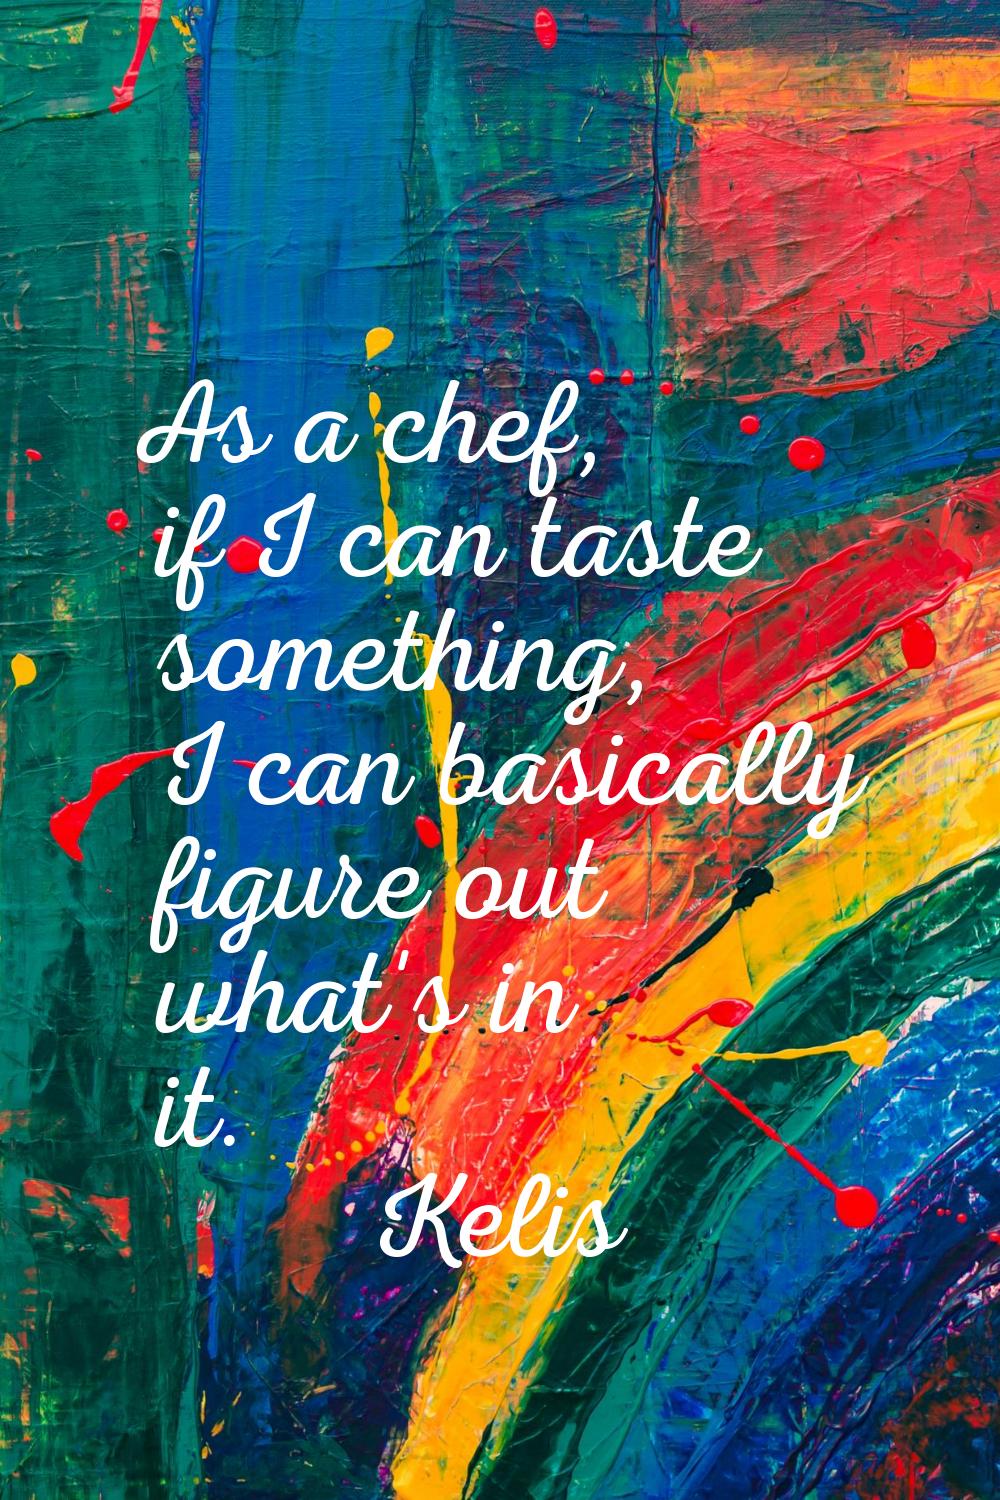 As a chef, if I can taste something, I can basically figure out what's in it.